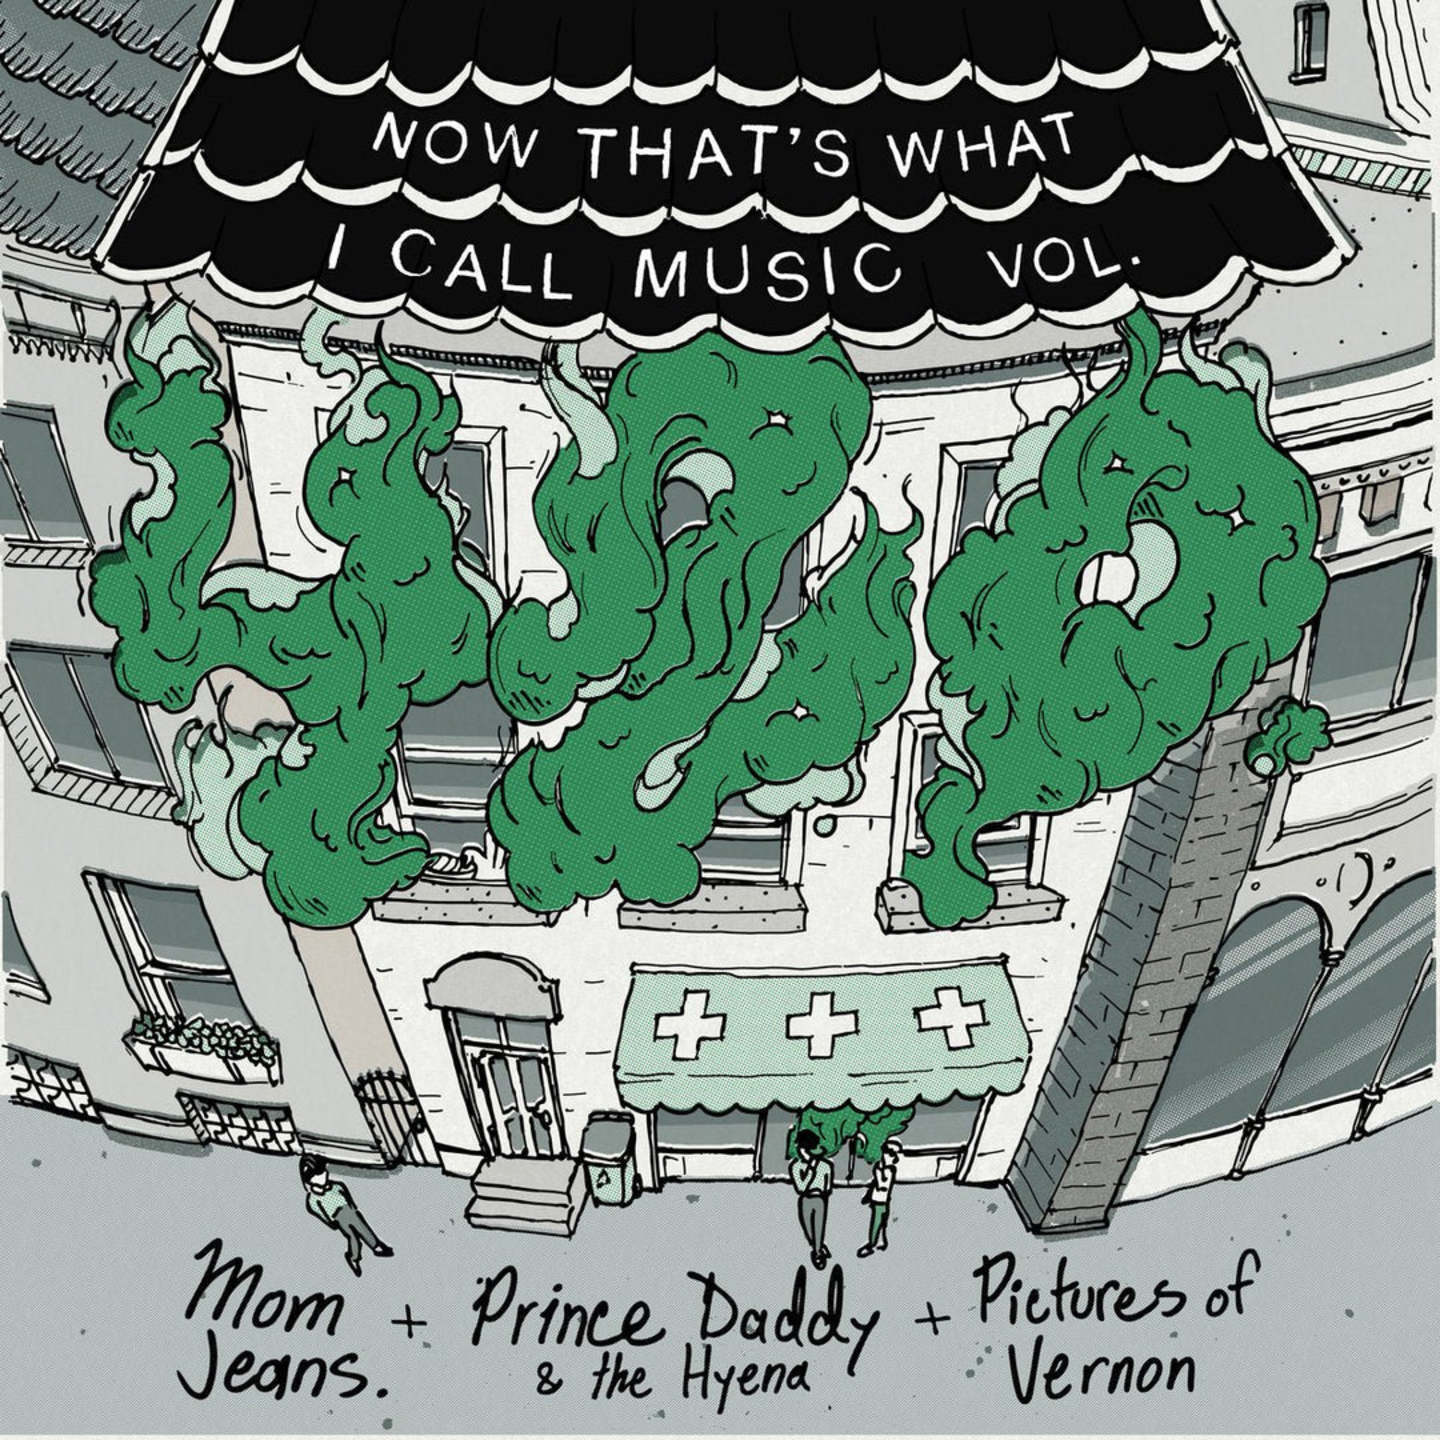 MOM JEANS  PRINCE DADDY & THE HYENA  PICTURES OF VERNON - Now Thats What I Call Music Vol. 420 10 Colour Vinyl